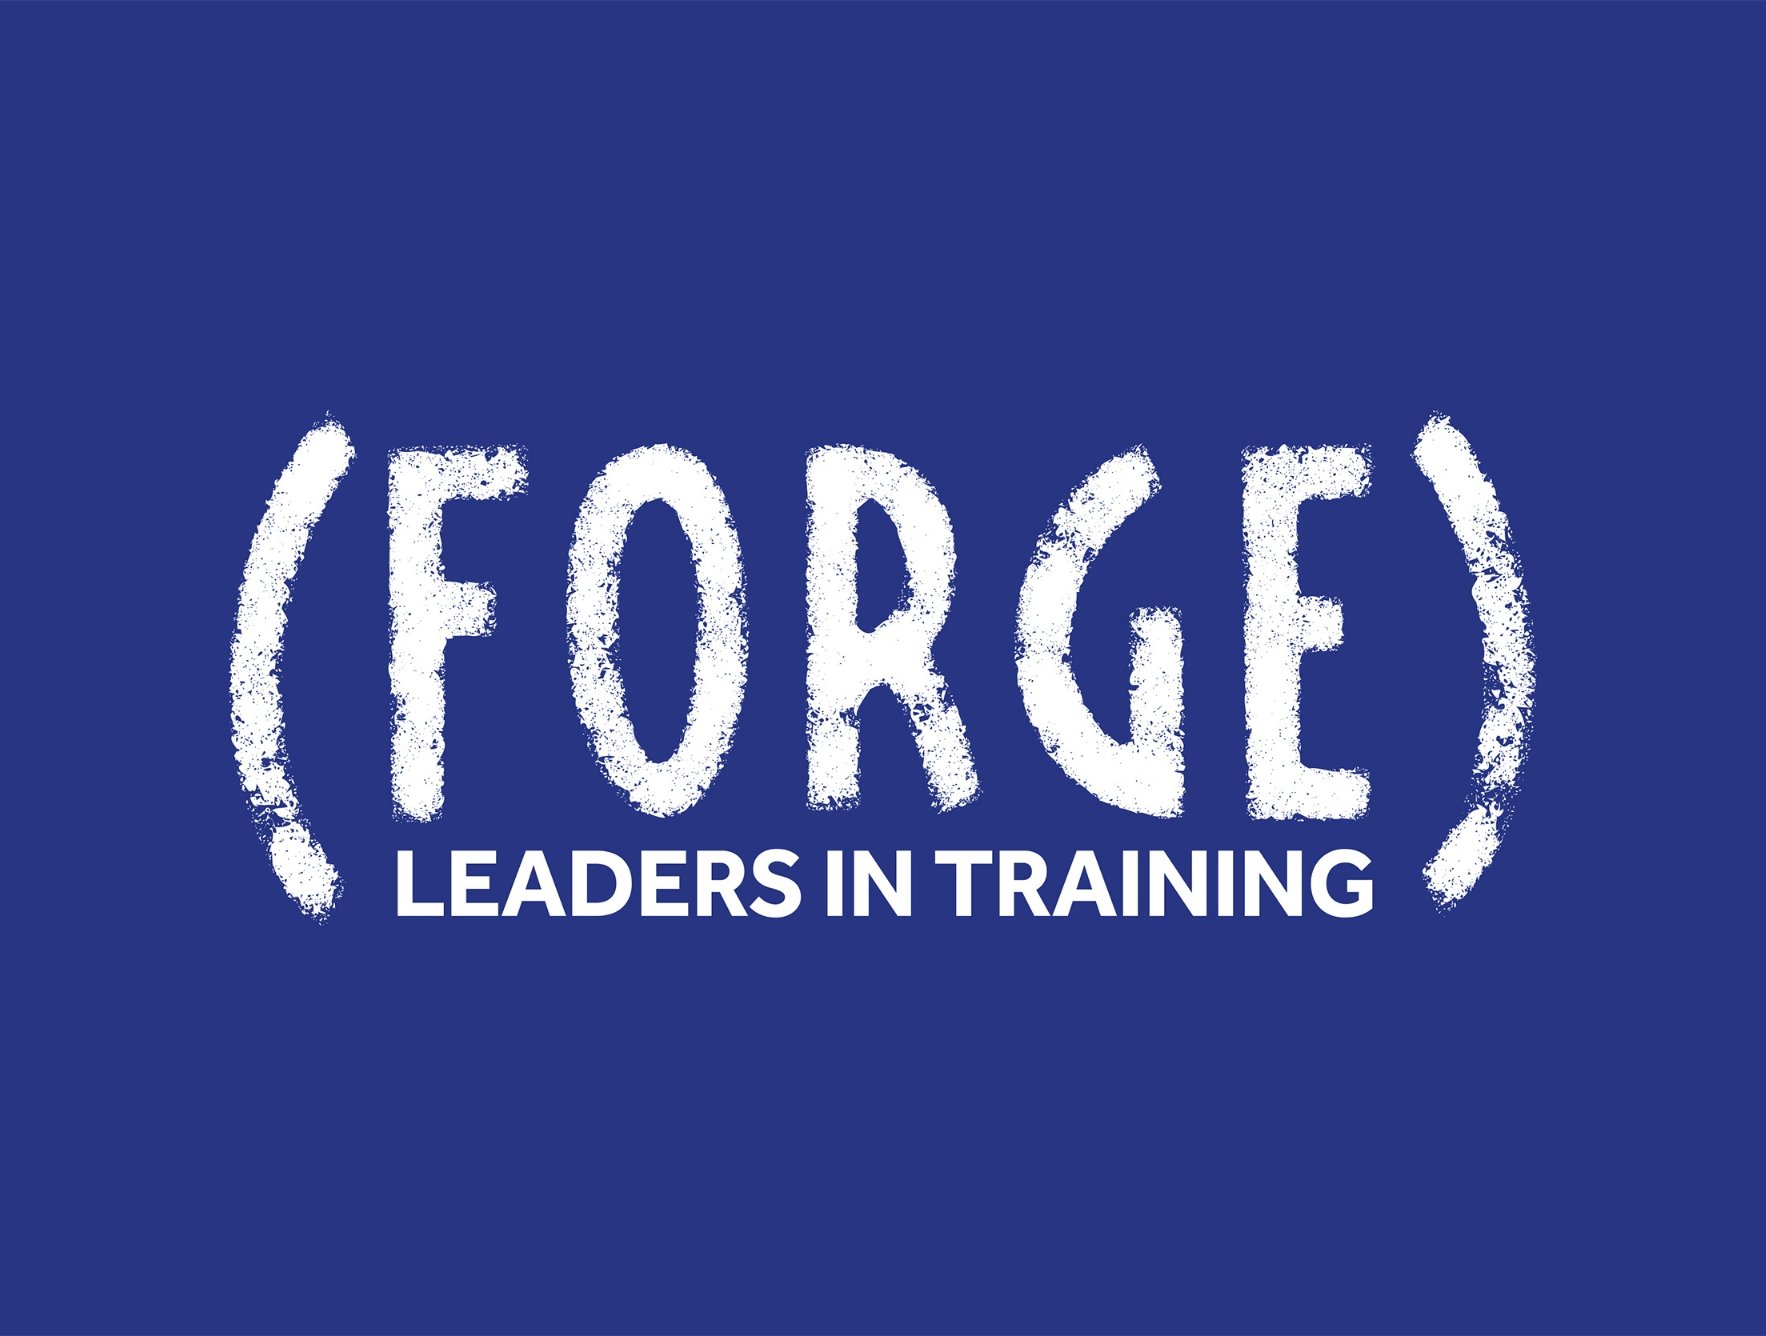 FORGE: Leaders in Training